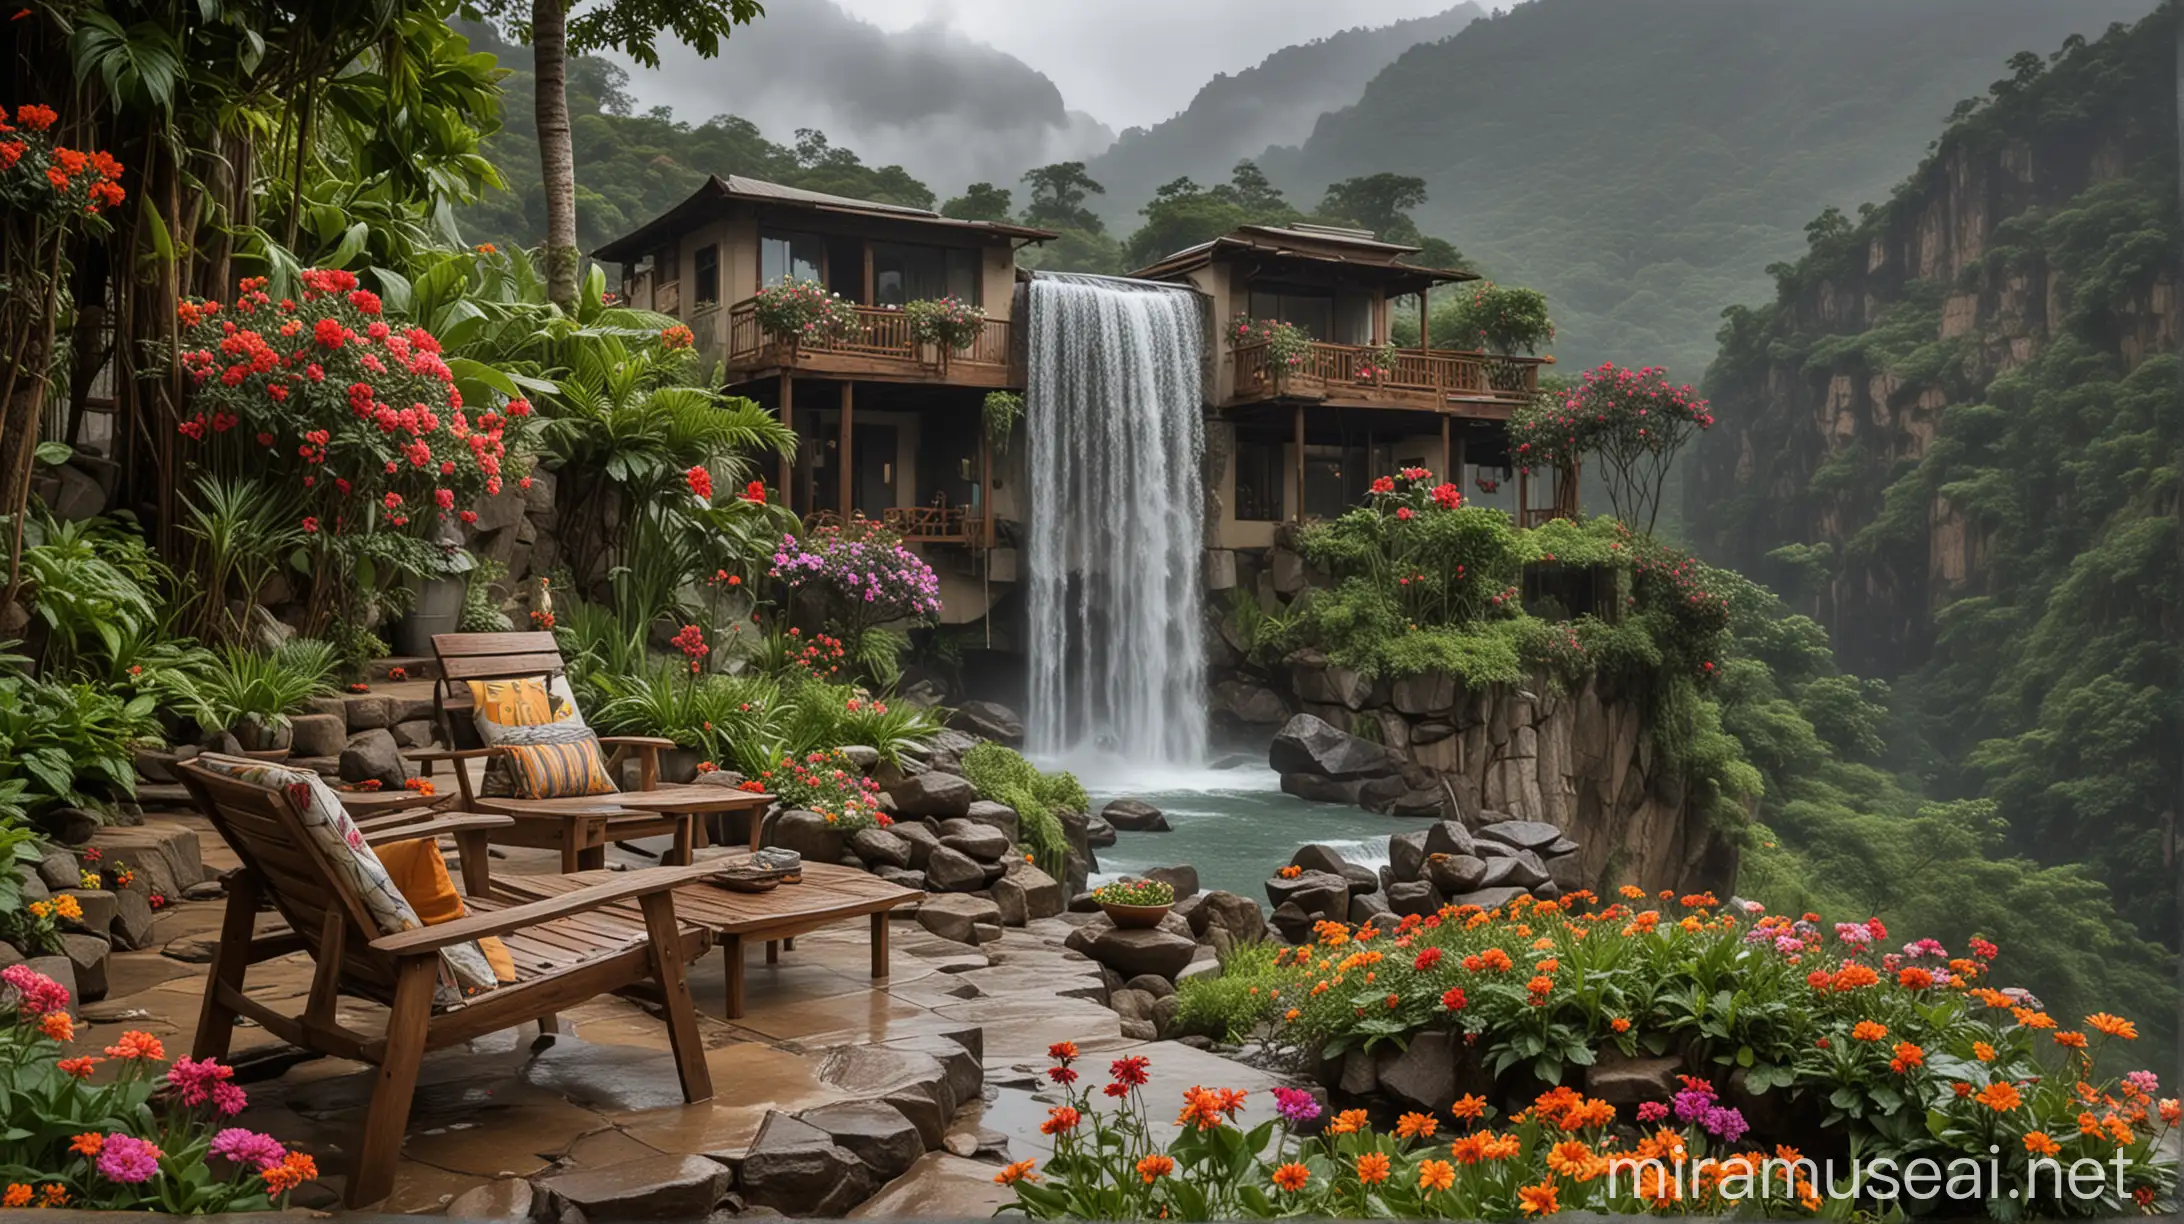 Mountain Monsoon House with Flower Garden and Waterfall Seating Area